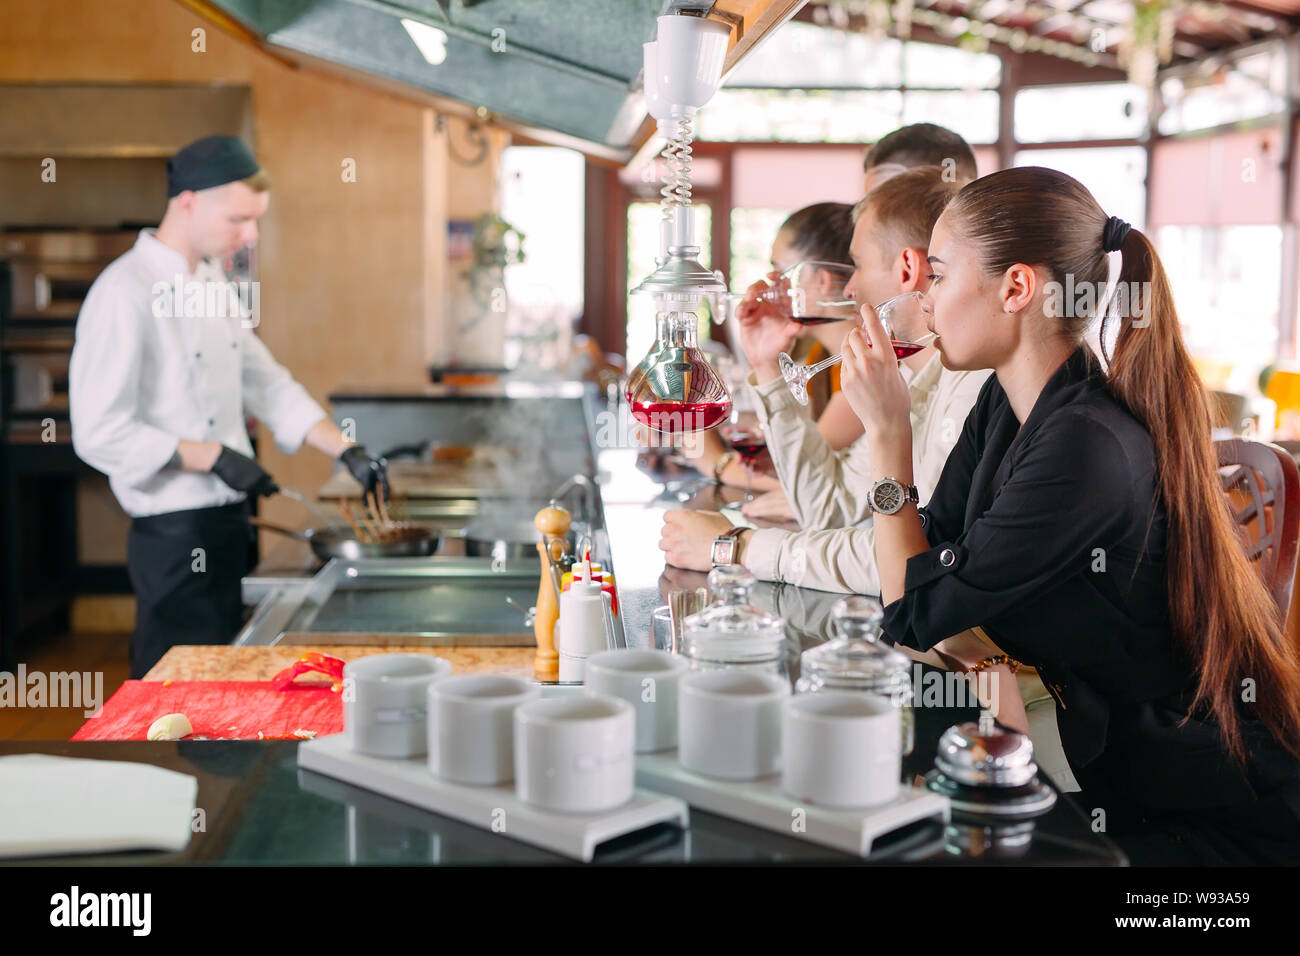 The chef prepares food in front of the visitors in the restaurant Stock Photo